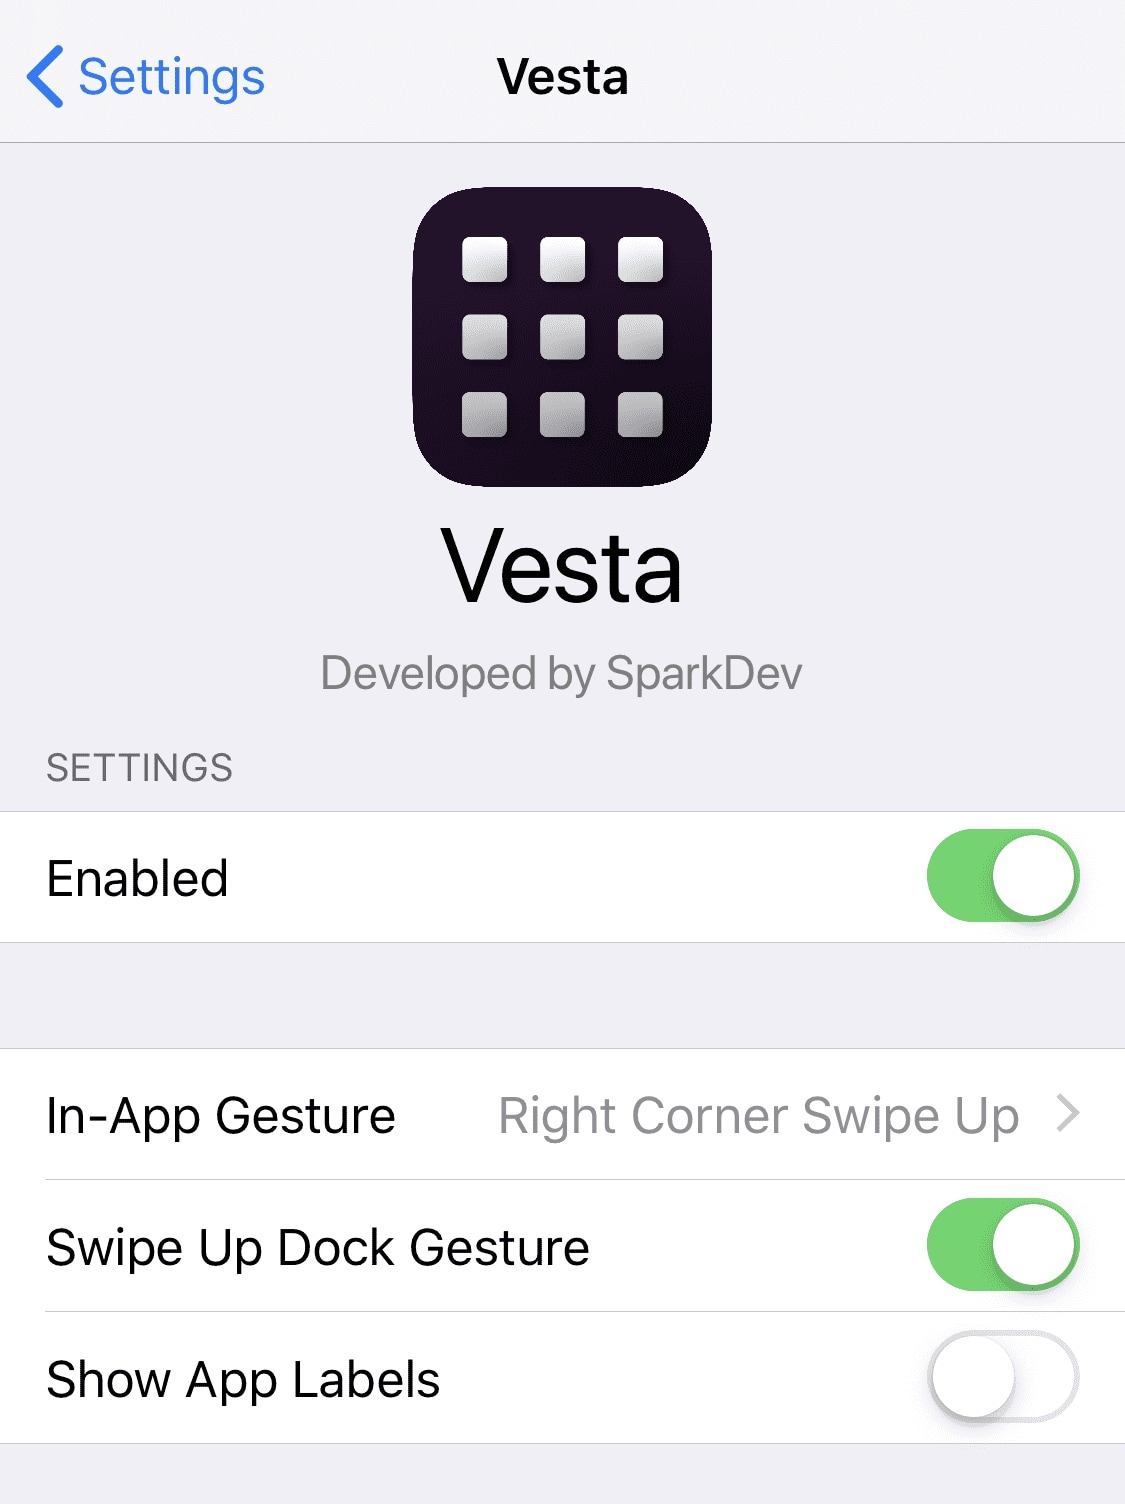 Add An Application Drawer To Your Jailbroken Iphone With Vesta